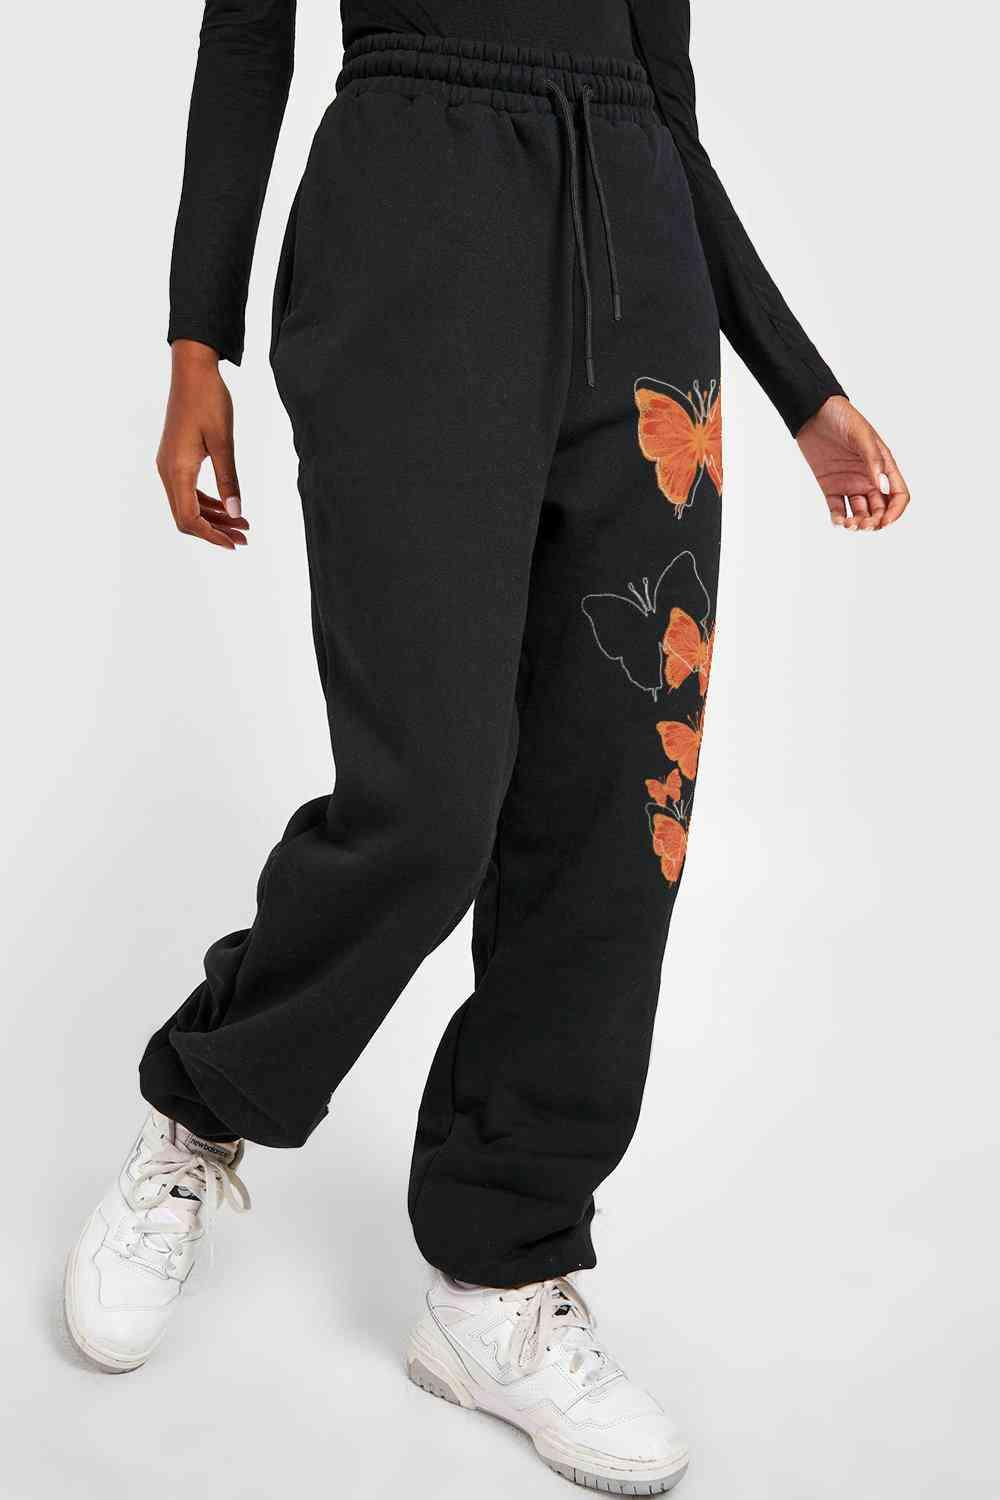 Simply Love Full Size Butterfly Graphic Sweatpants - Immenzive